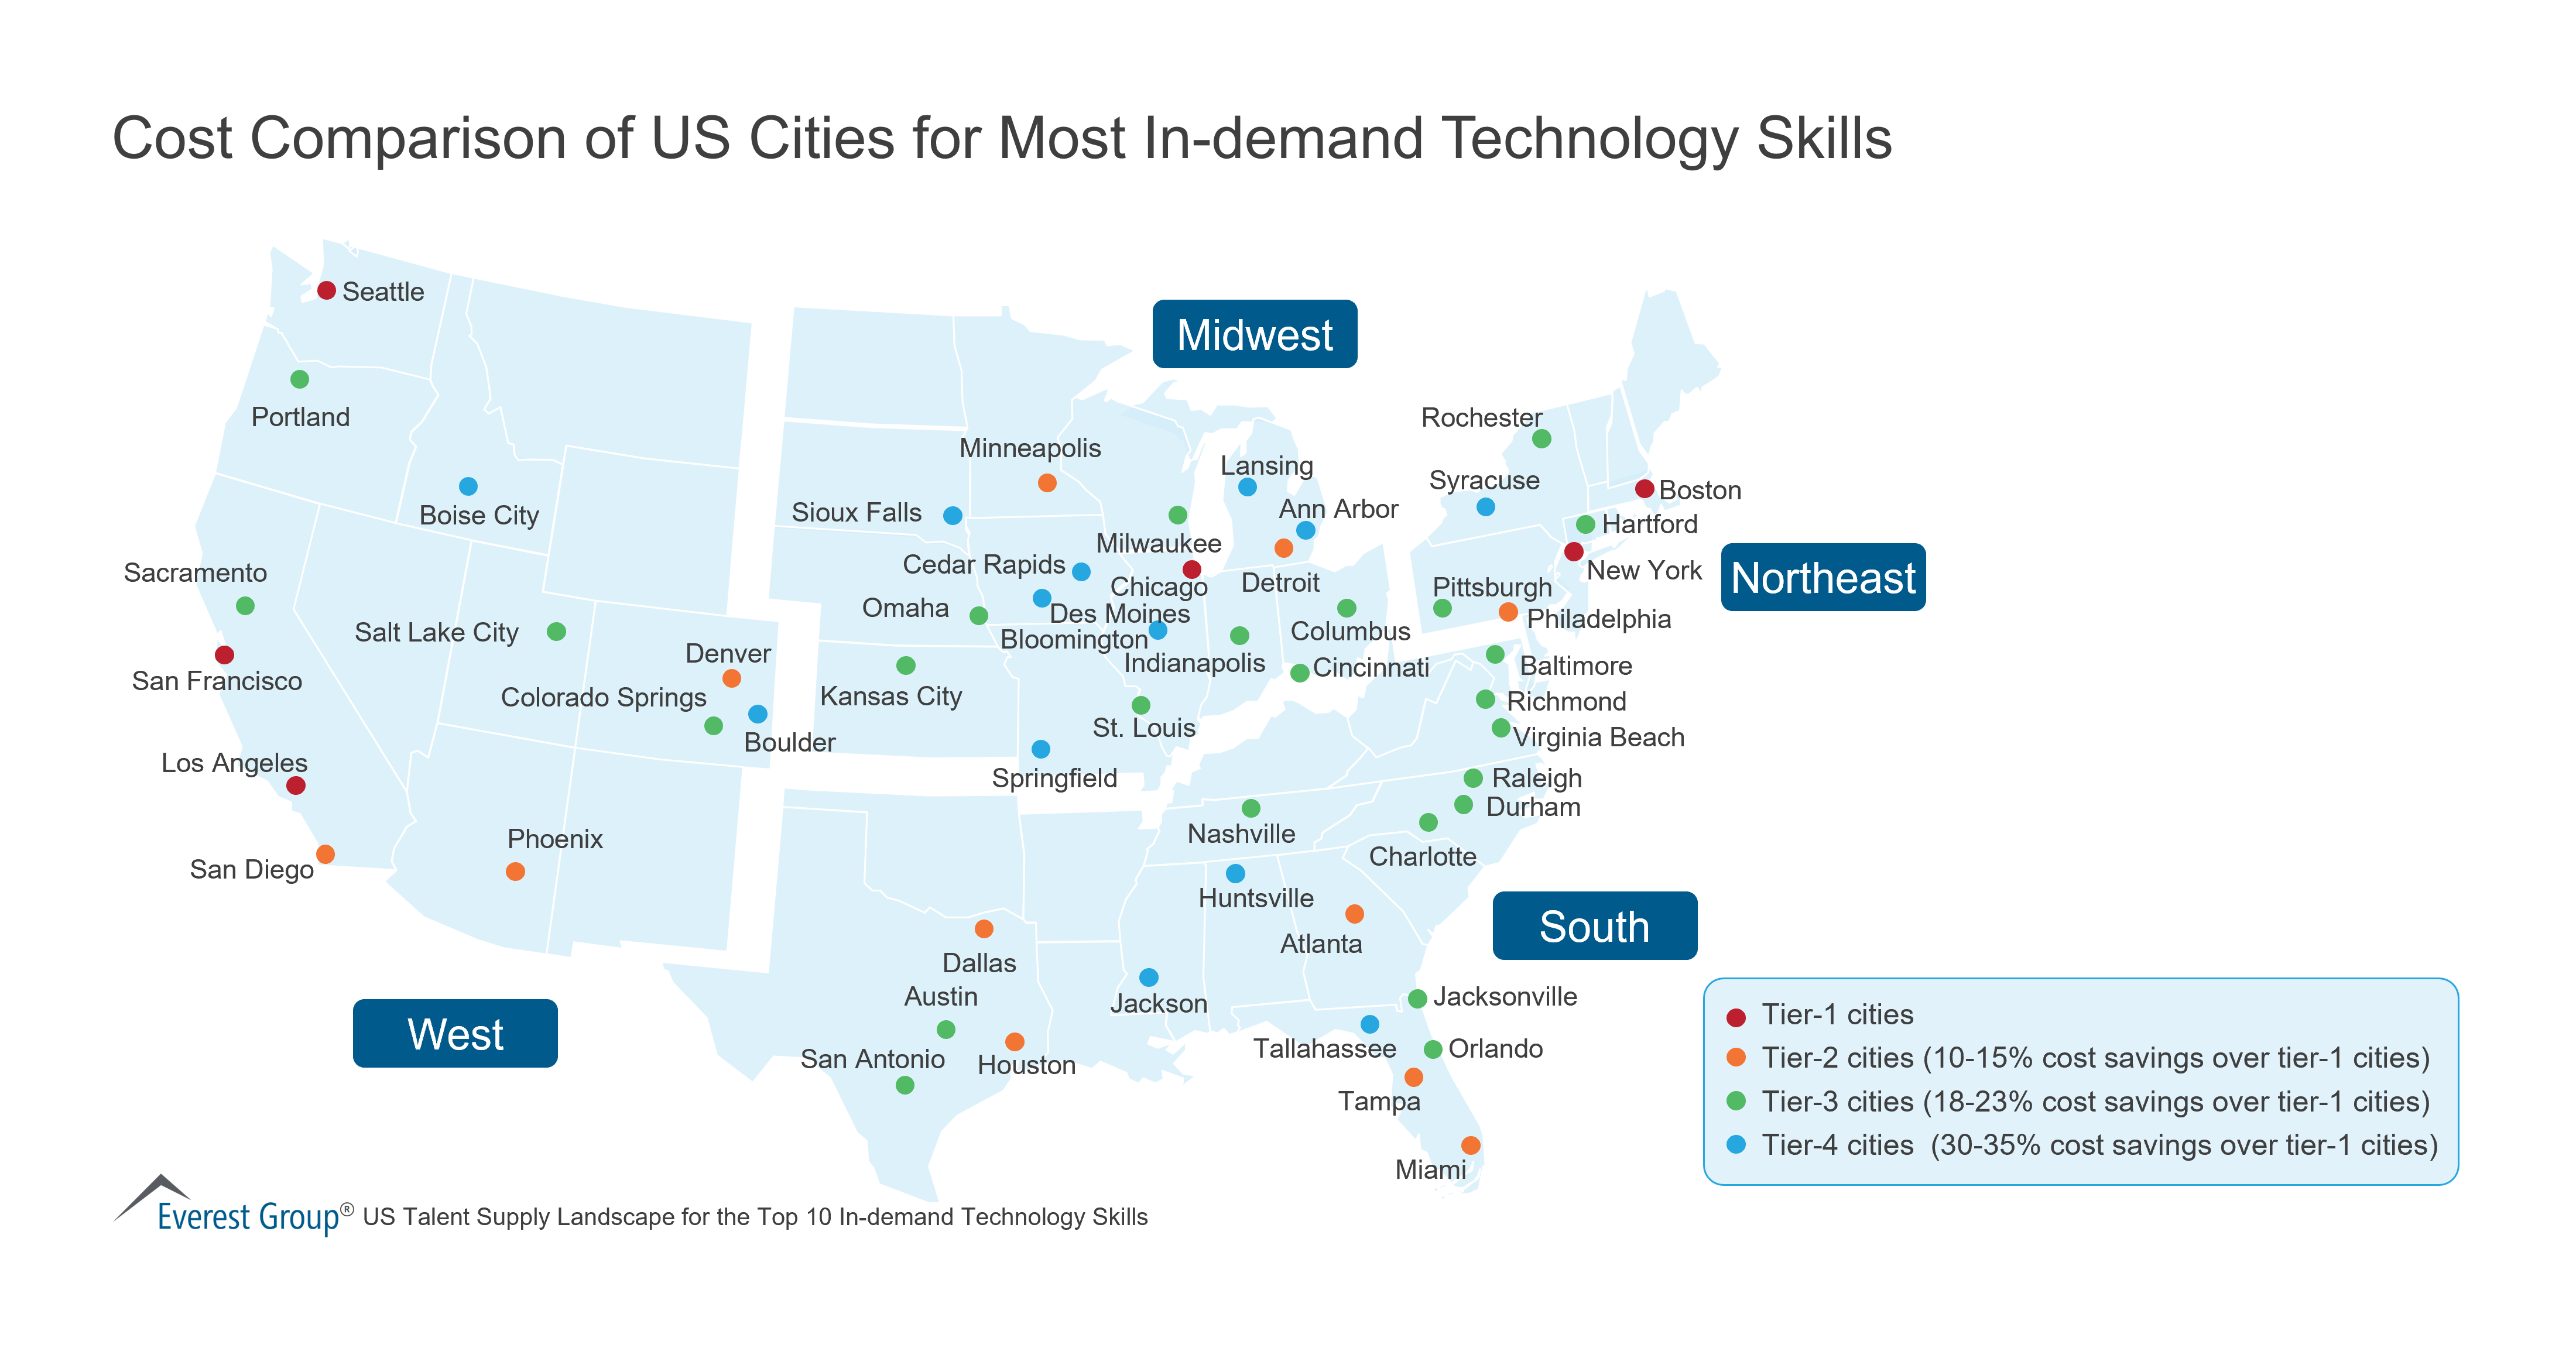 Cost Comparison of US Cities for Most In-demand Technology Skills